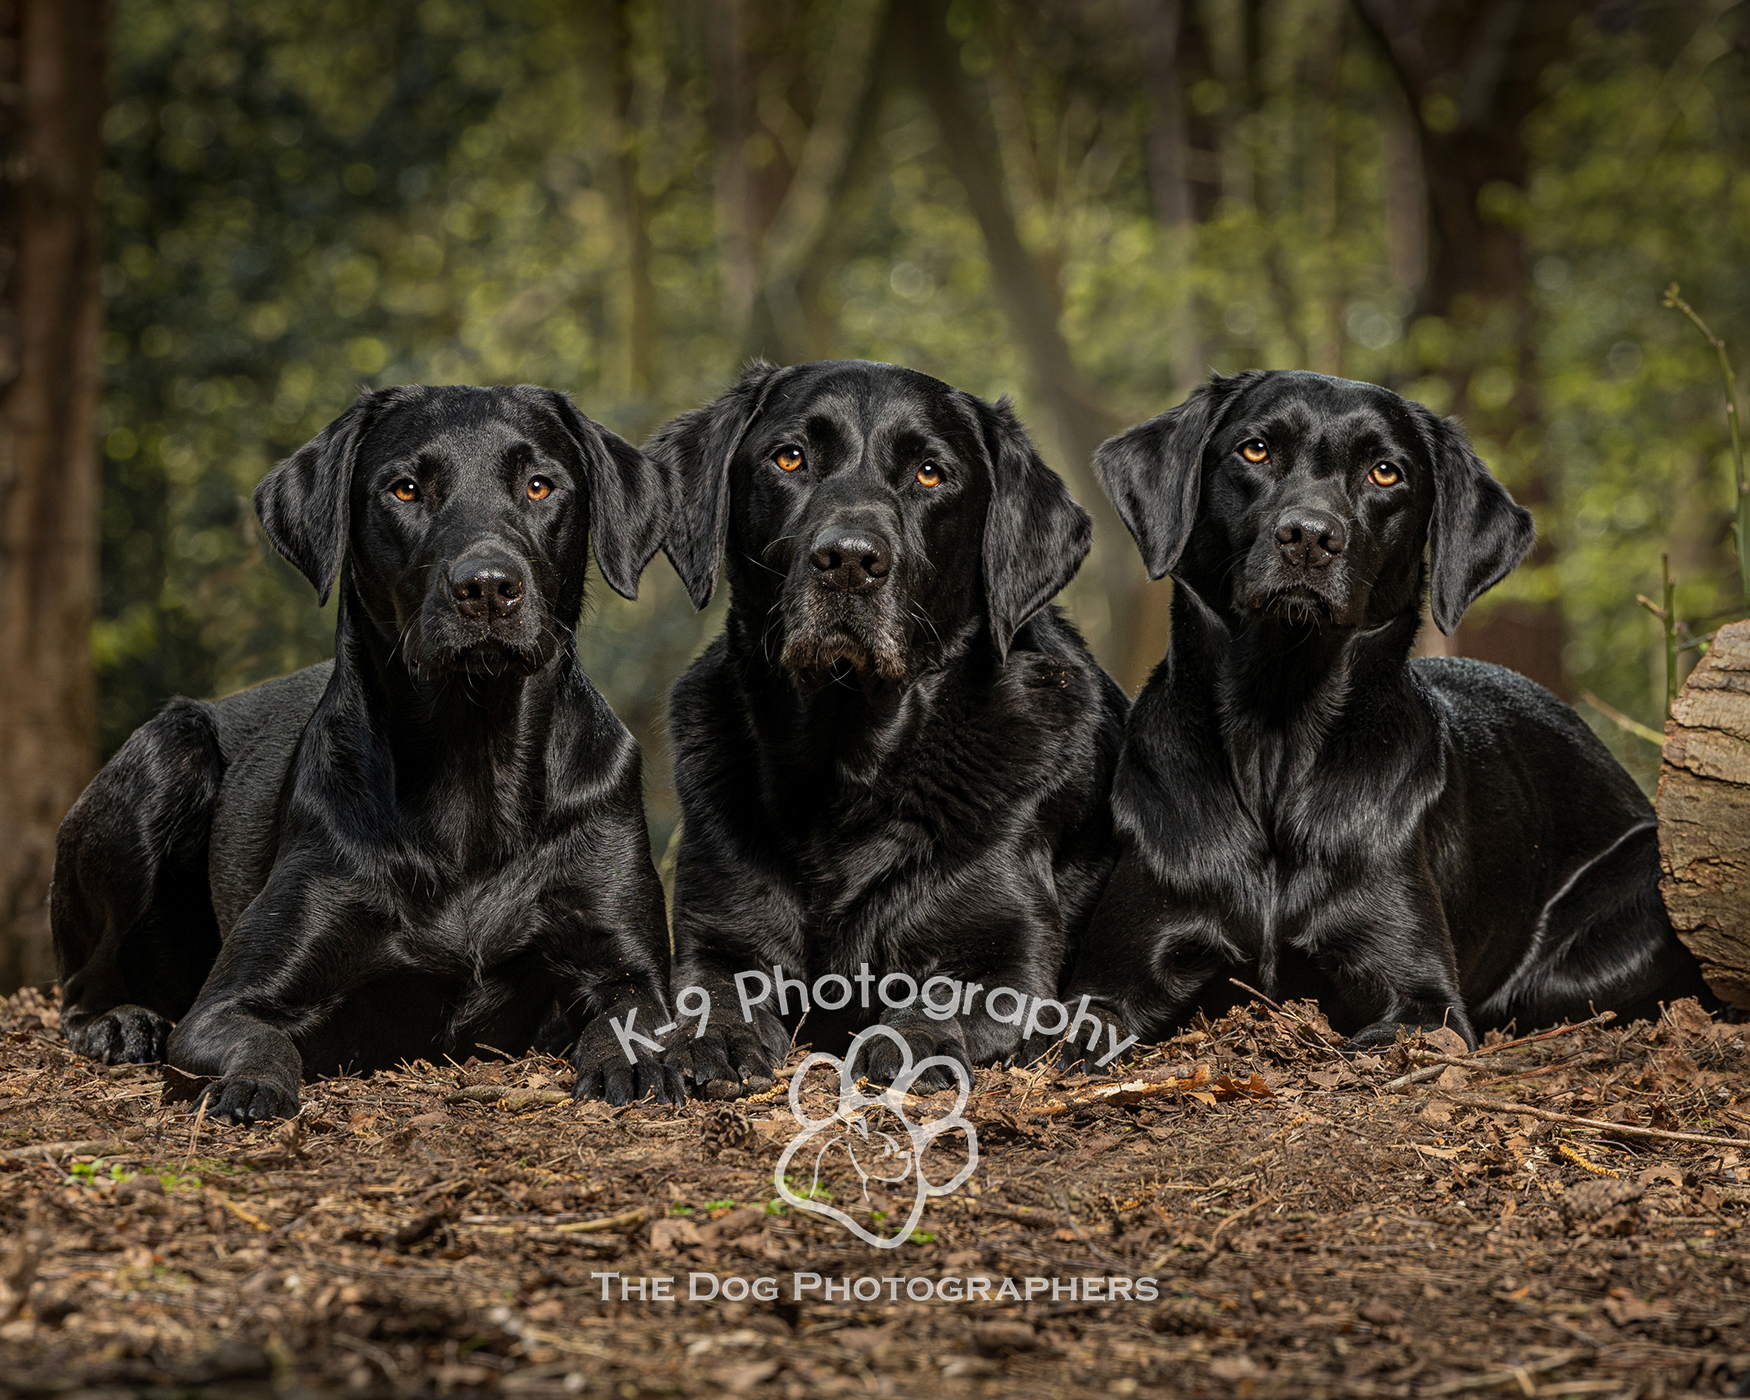 photograph of three beautiful Black Labrador dogs on location by the dog photographer Adrian Bullers